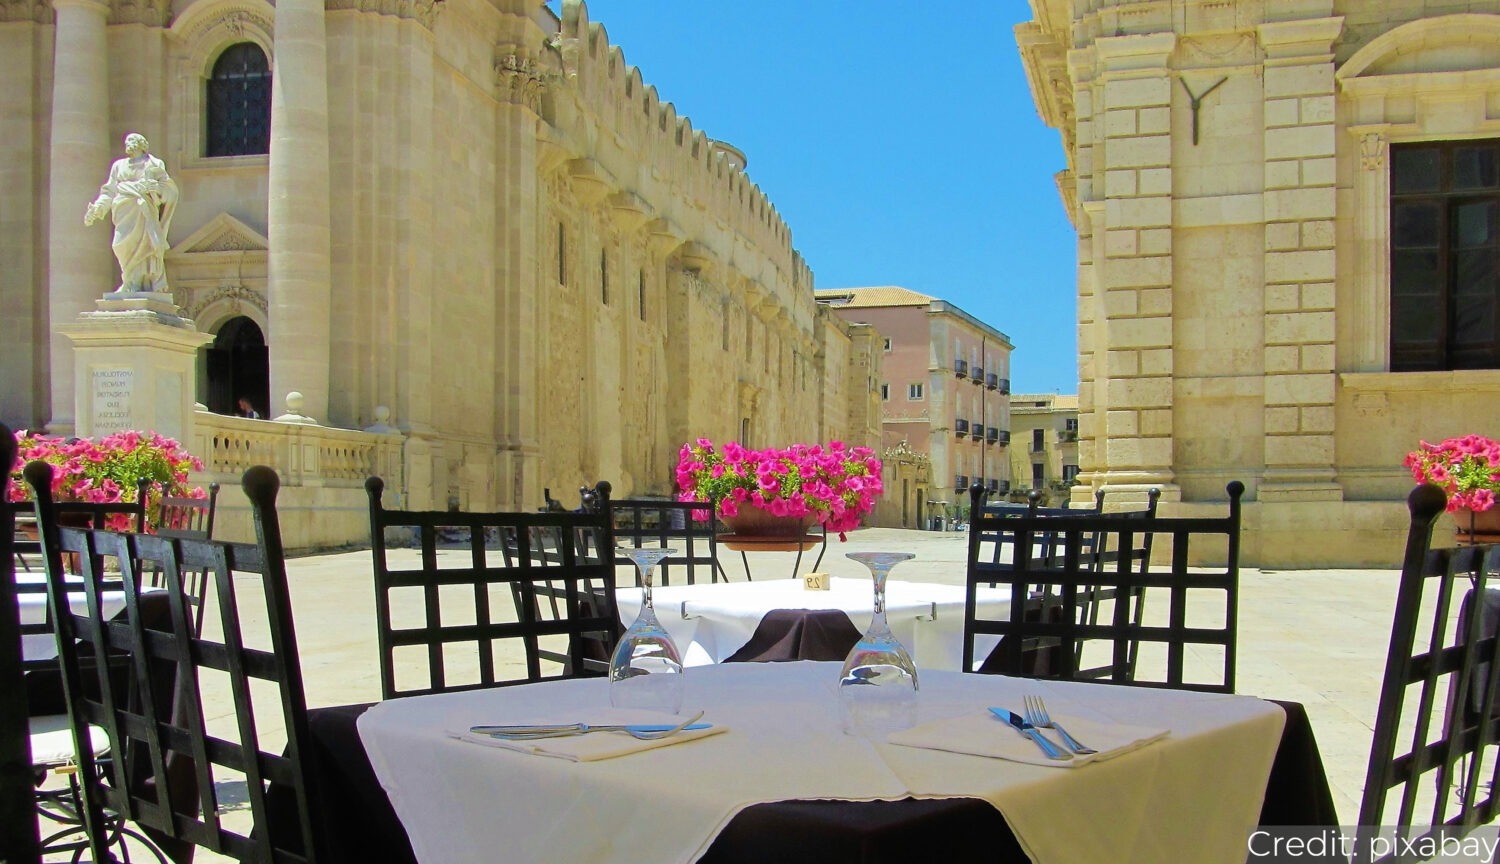 Italy (Sicily): See & Do the Classic Route in 7 Days, 1st Class Custom Tours